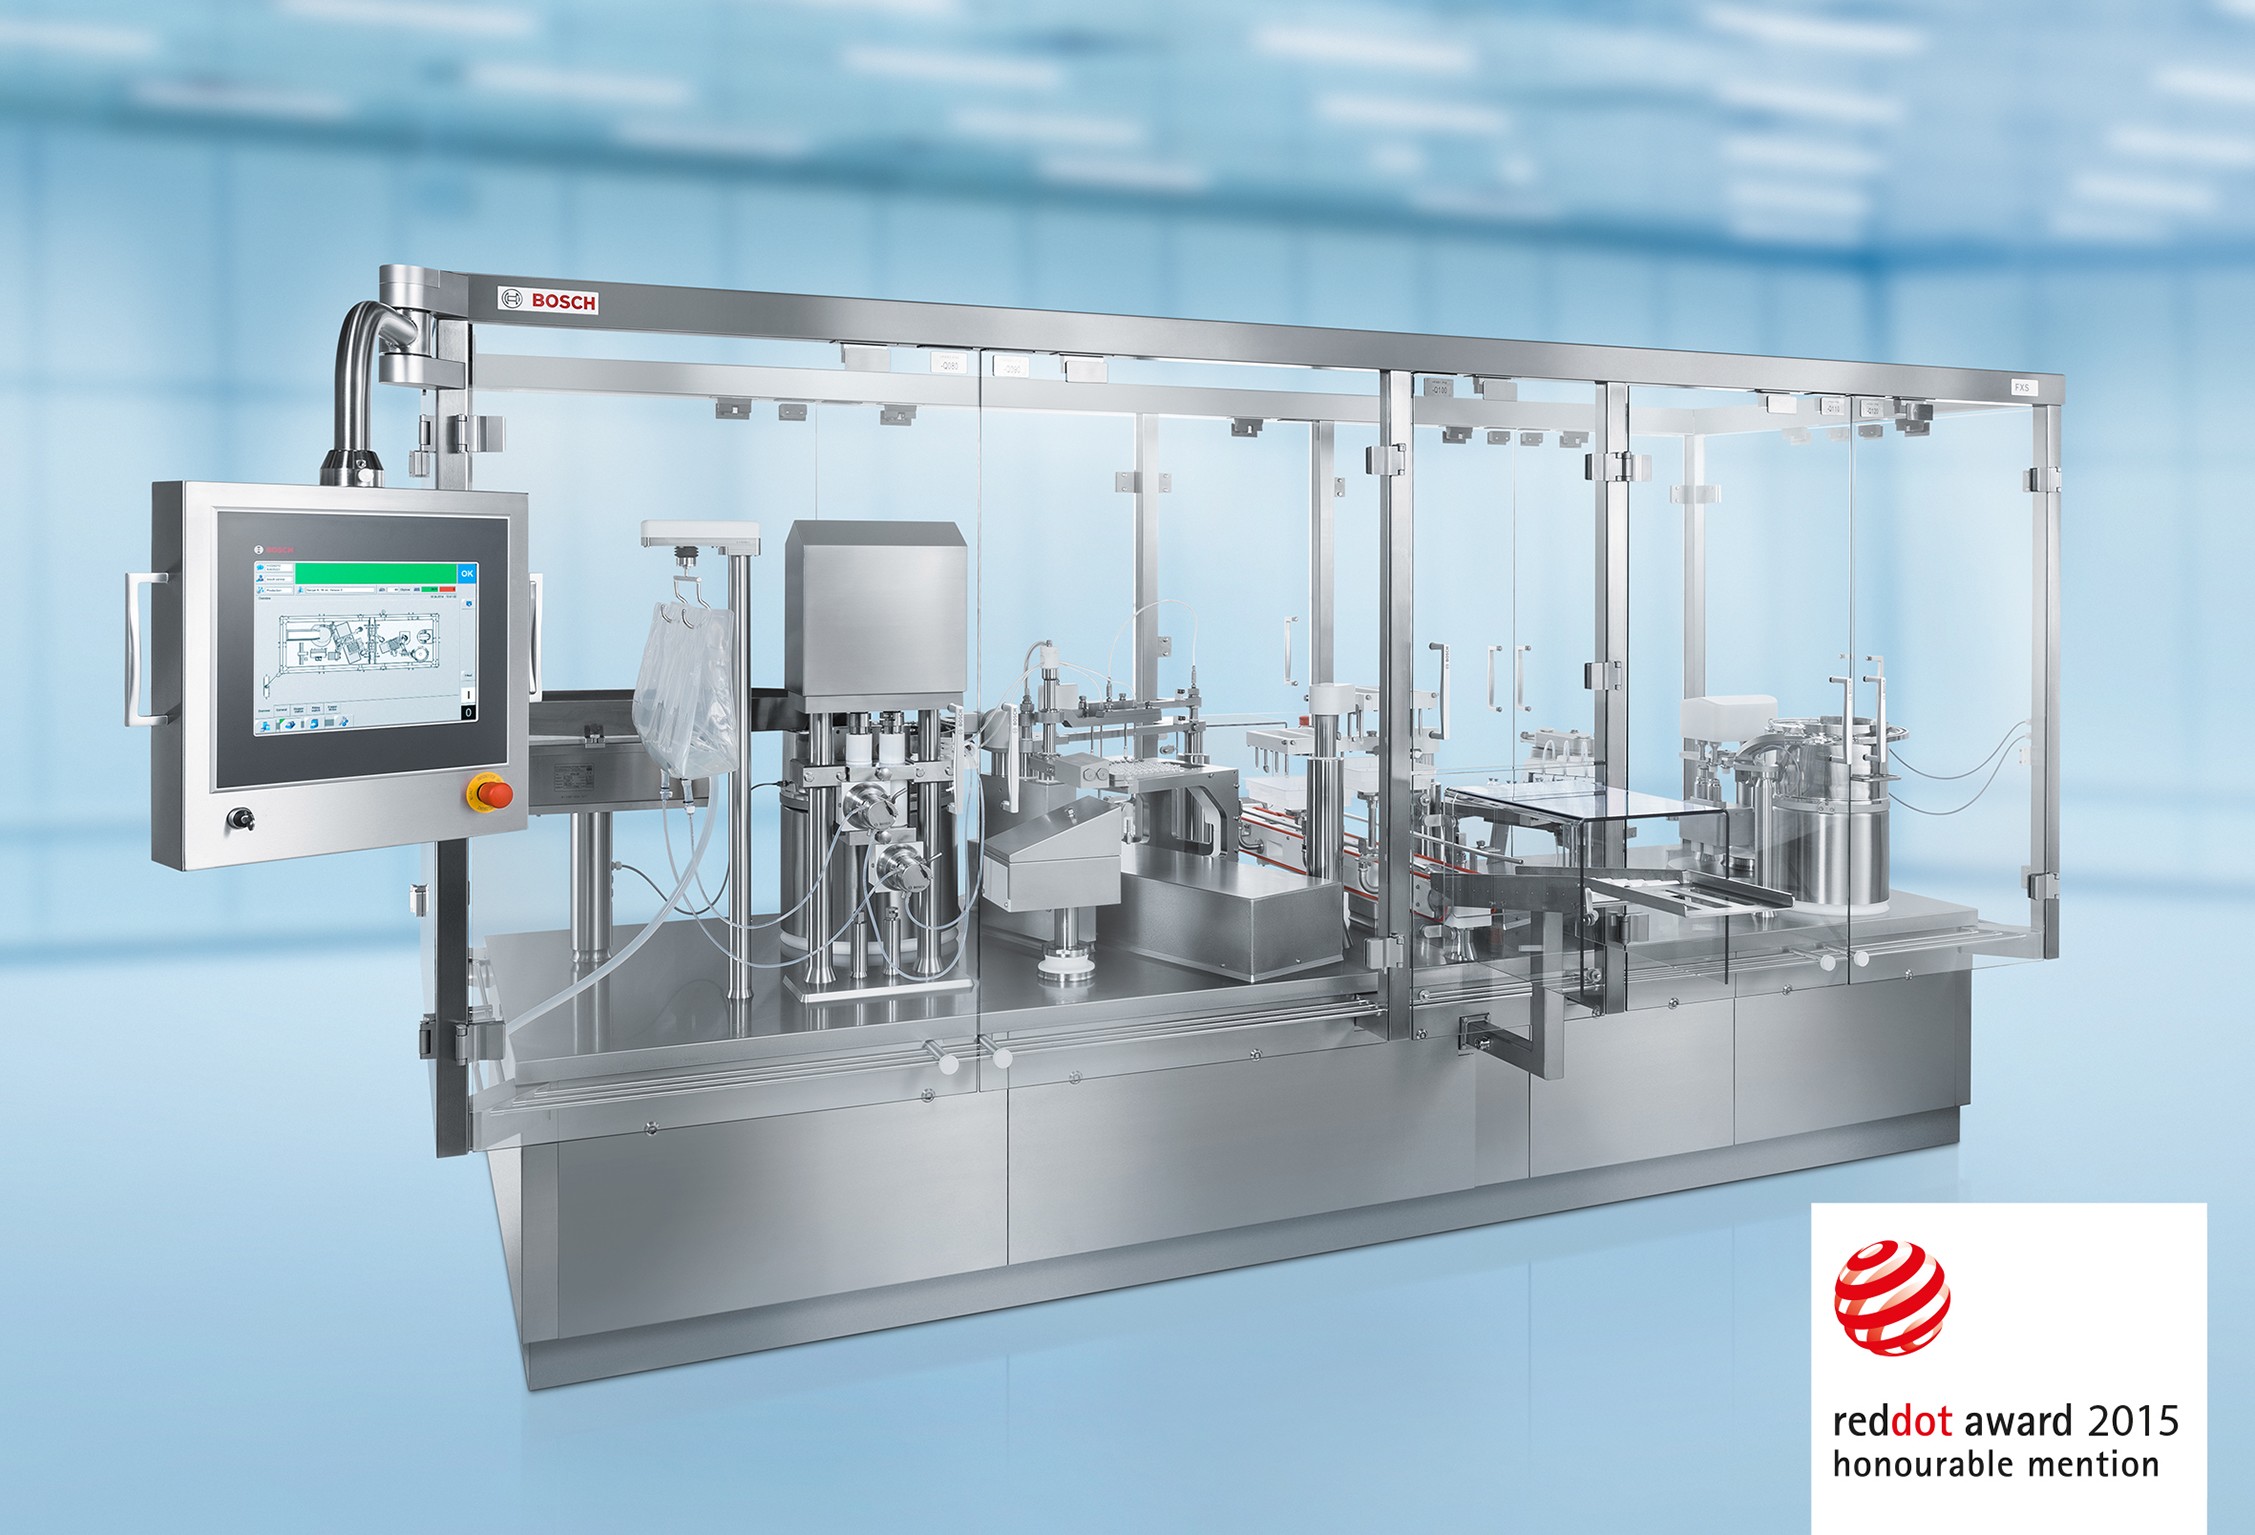 Excellent Packaging Engineering - Bosch Machine Honoured with Red Dot Award